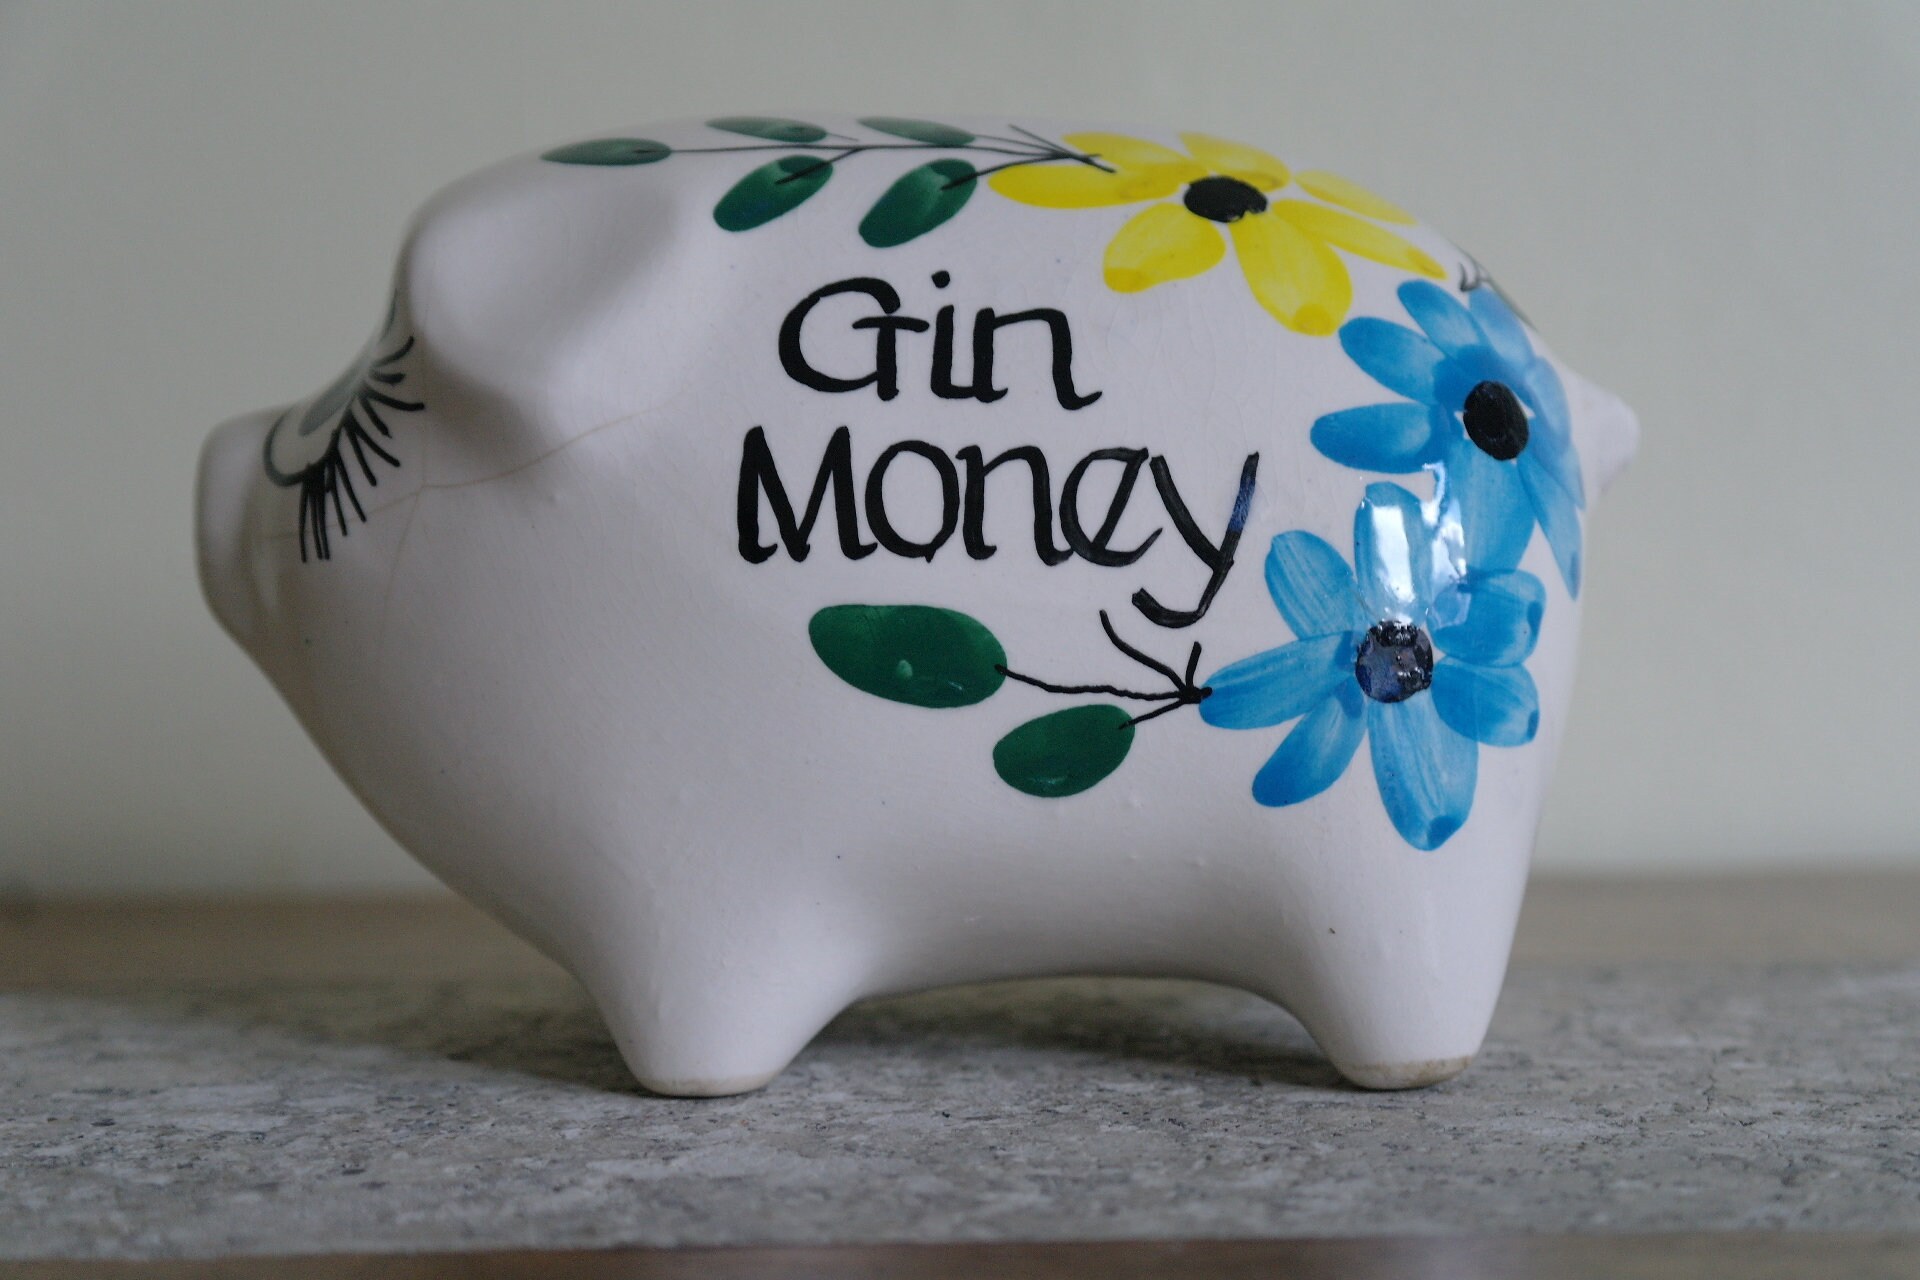 WOODEN FRAMED NOVELTY GIN FUND MONEY BOX GIFT BOXED PRESENT PIGGY BANK DRINKING 